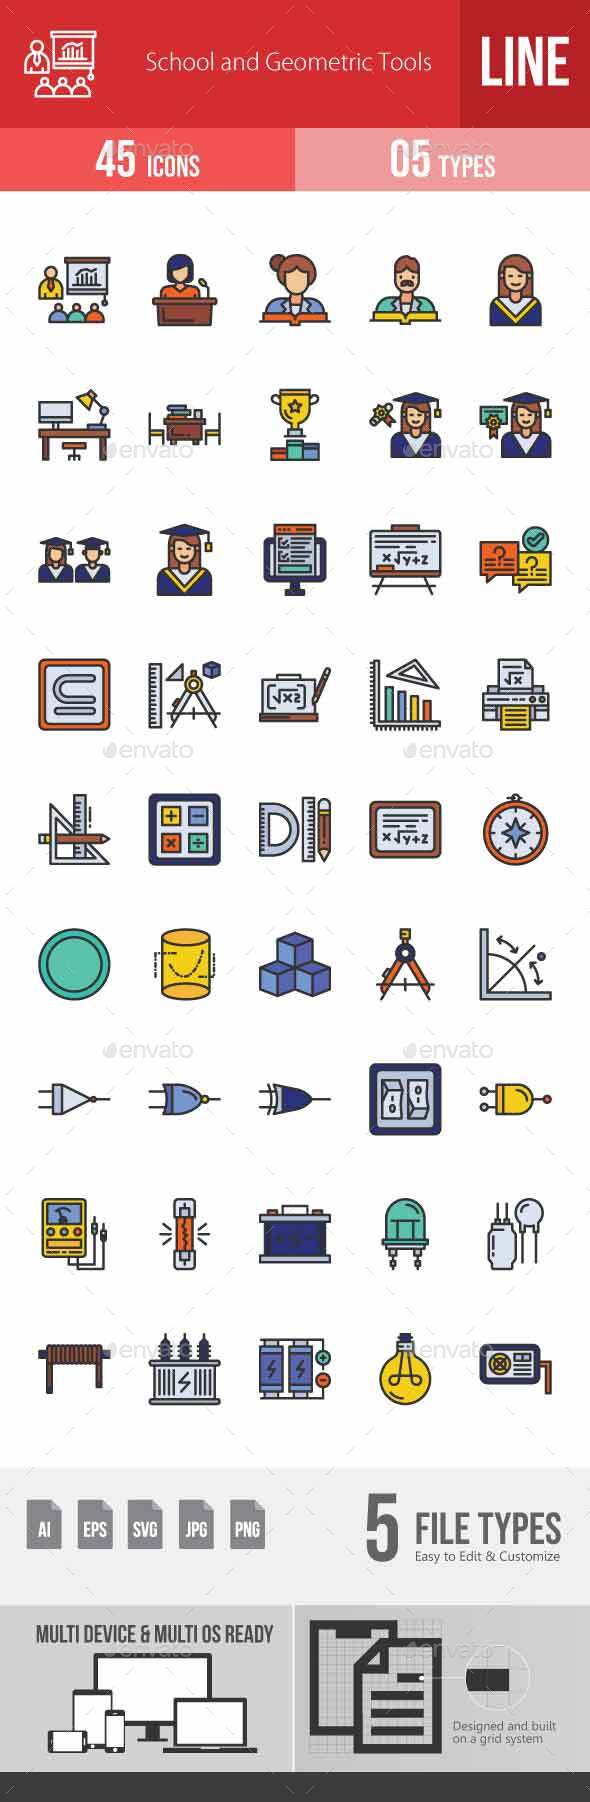 [DOWNLOAD]School and Geometric Tools Filled Line Icons